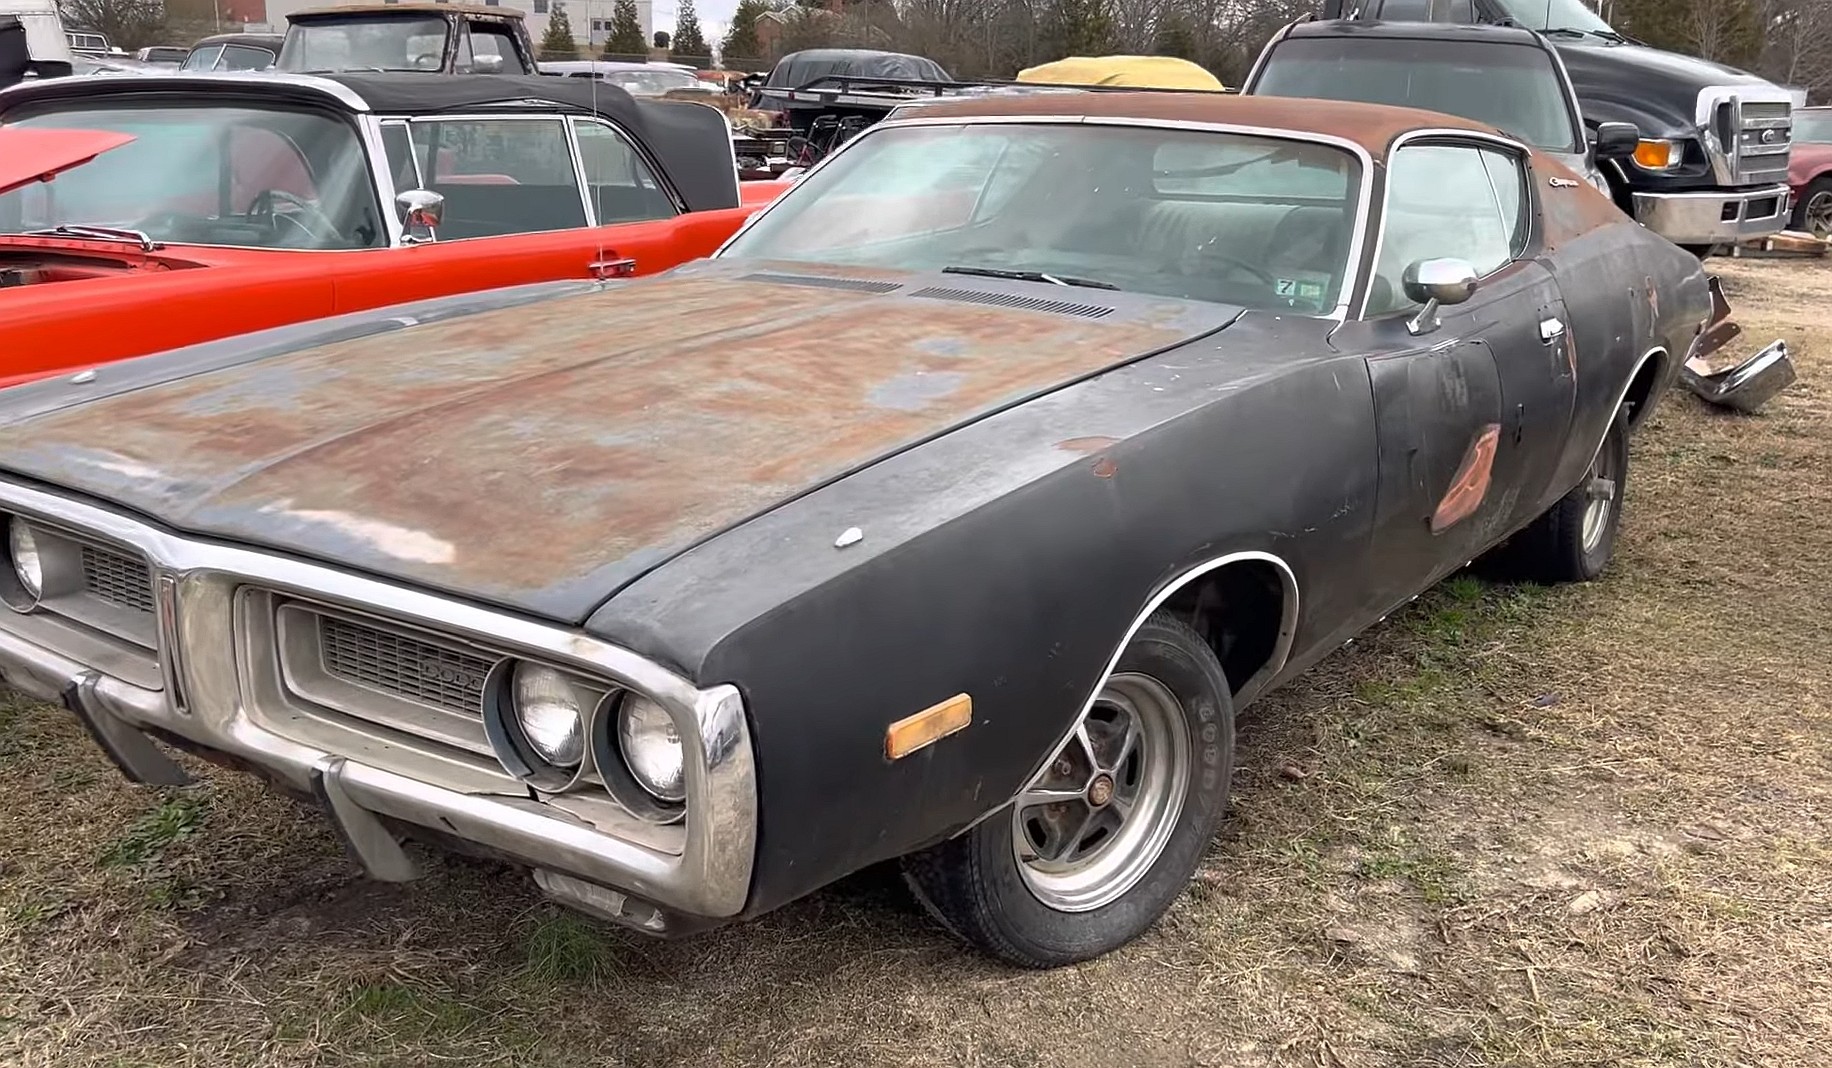 1972 Dodge Charger Parked for 30 Years Desperately Needs a 426 HEMI - autoevolution